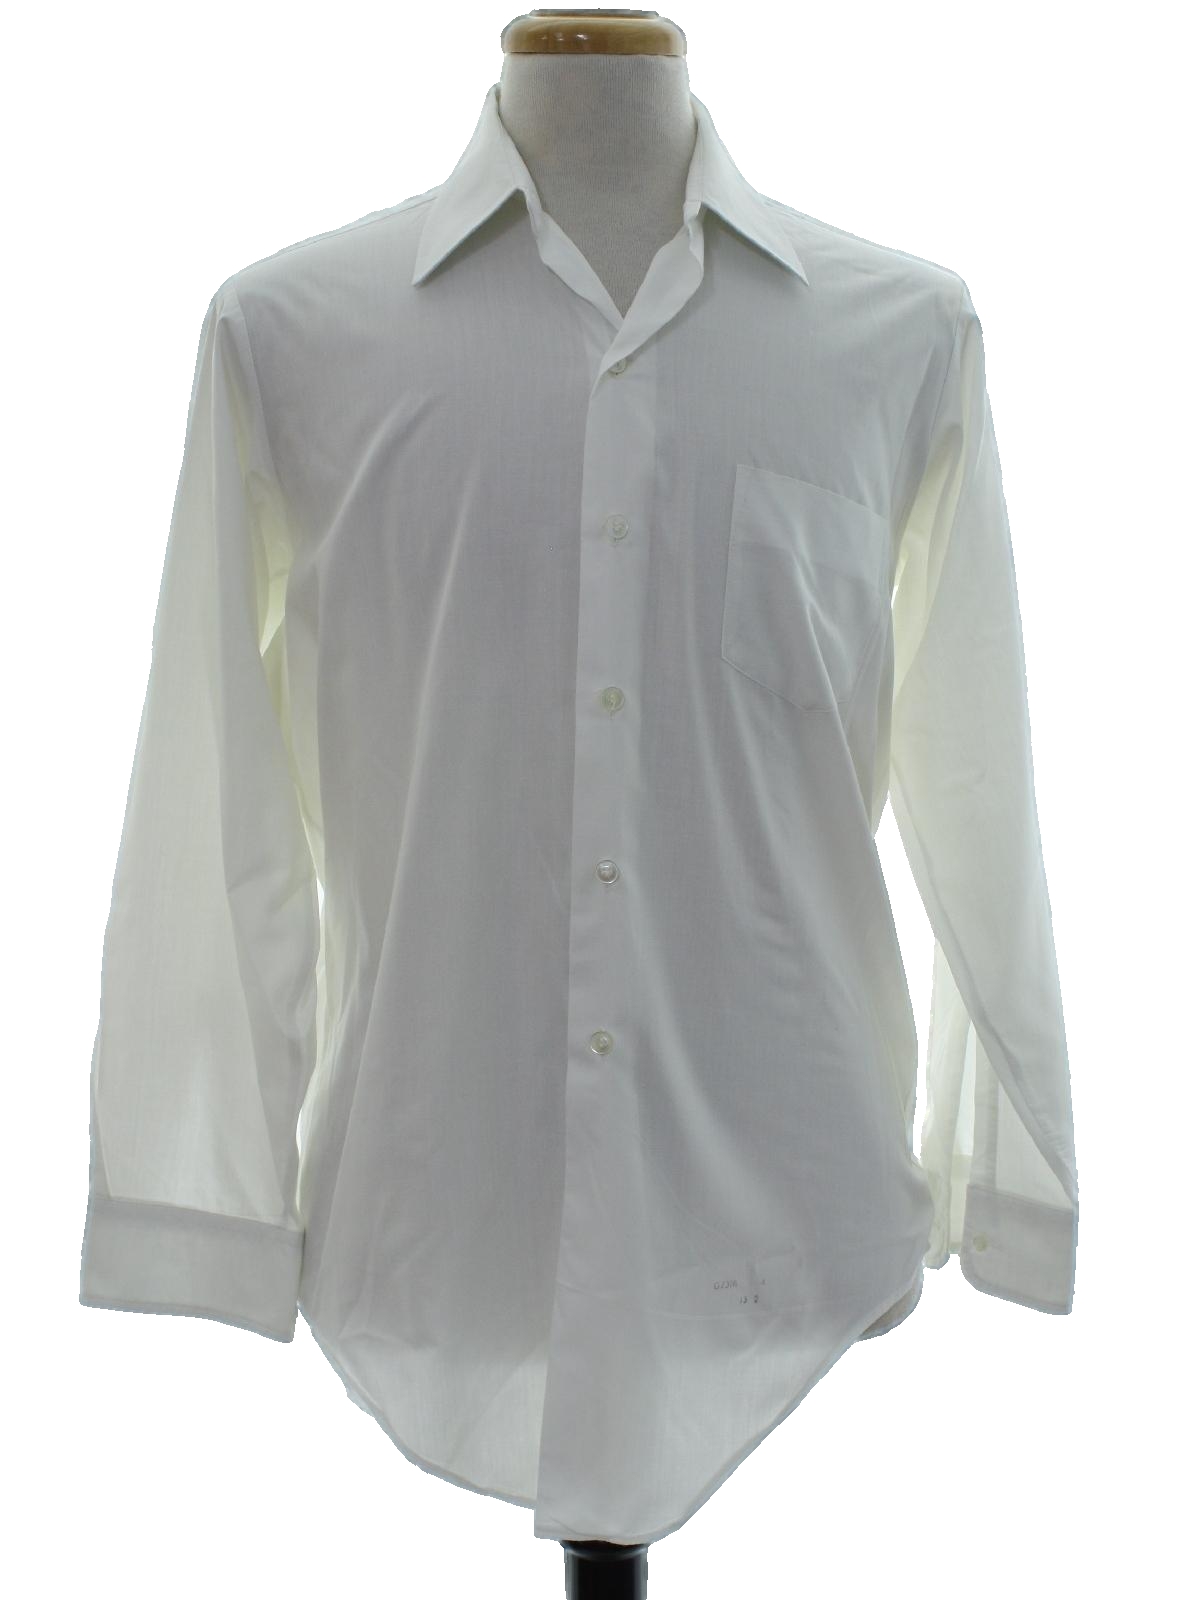 Vintage Kingsly Sixties Shirt: Early 60s -Kingsly- Mens white cotton